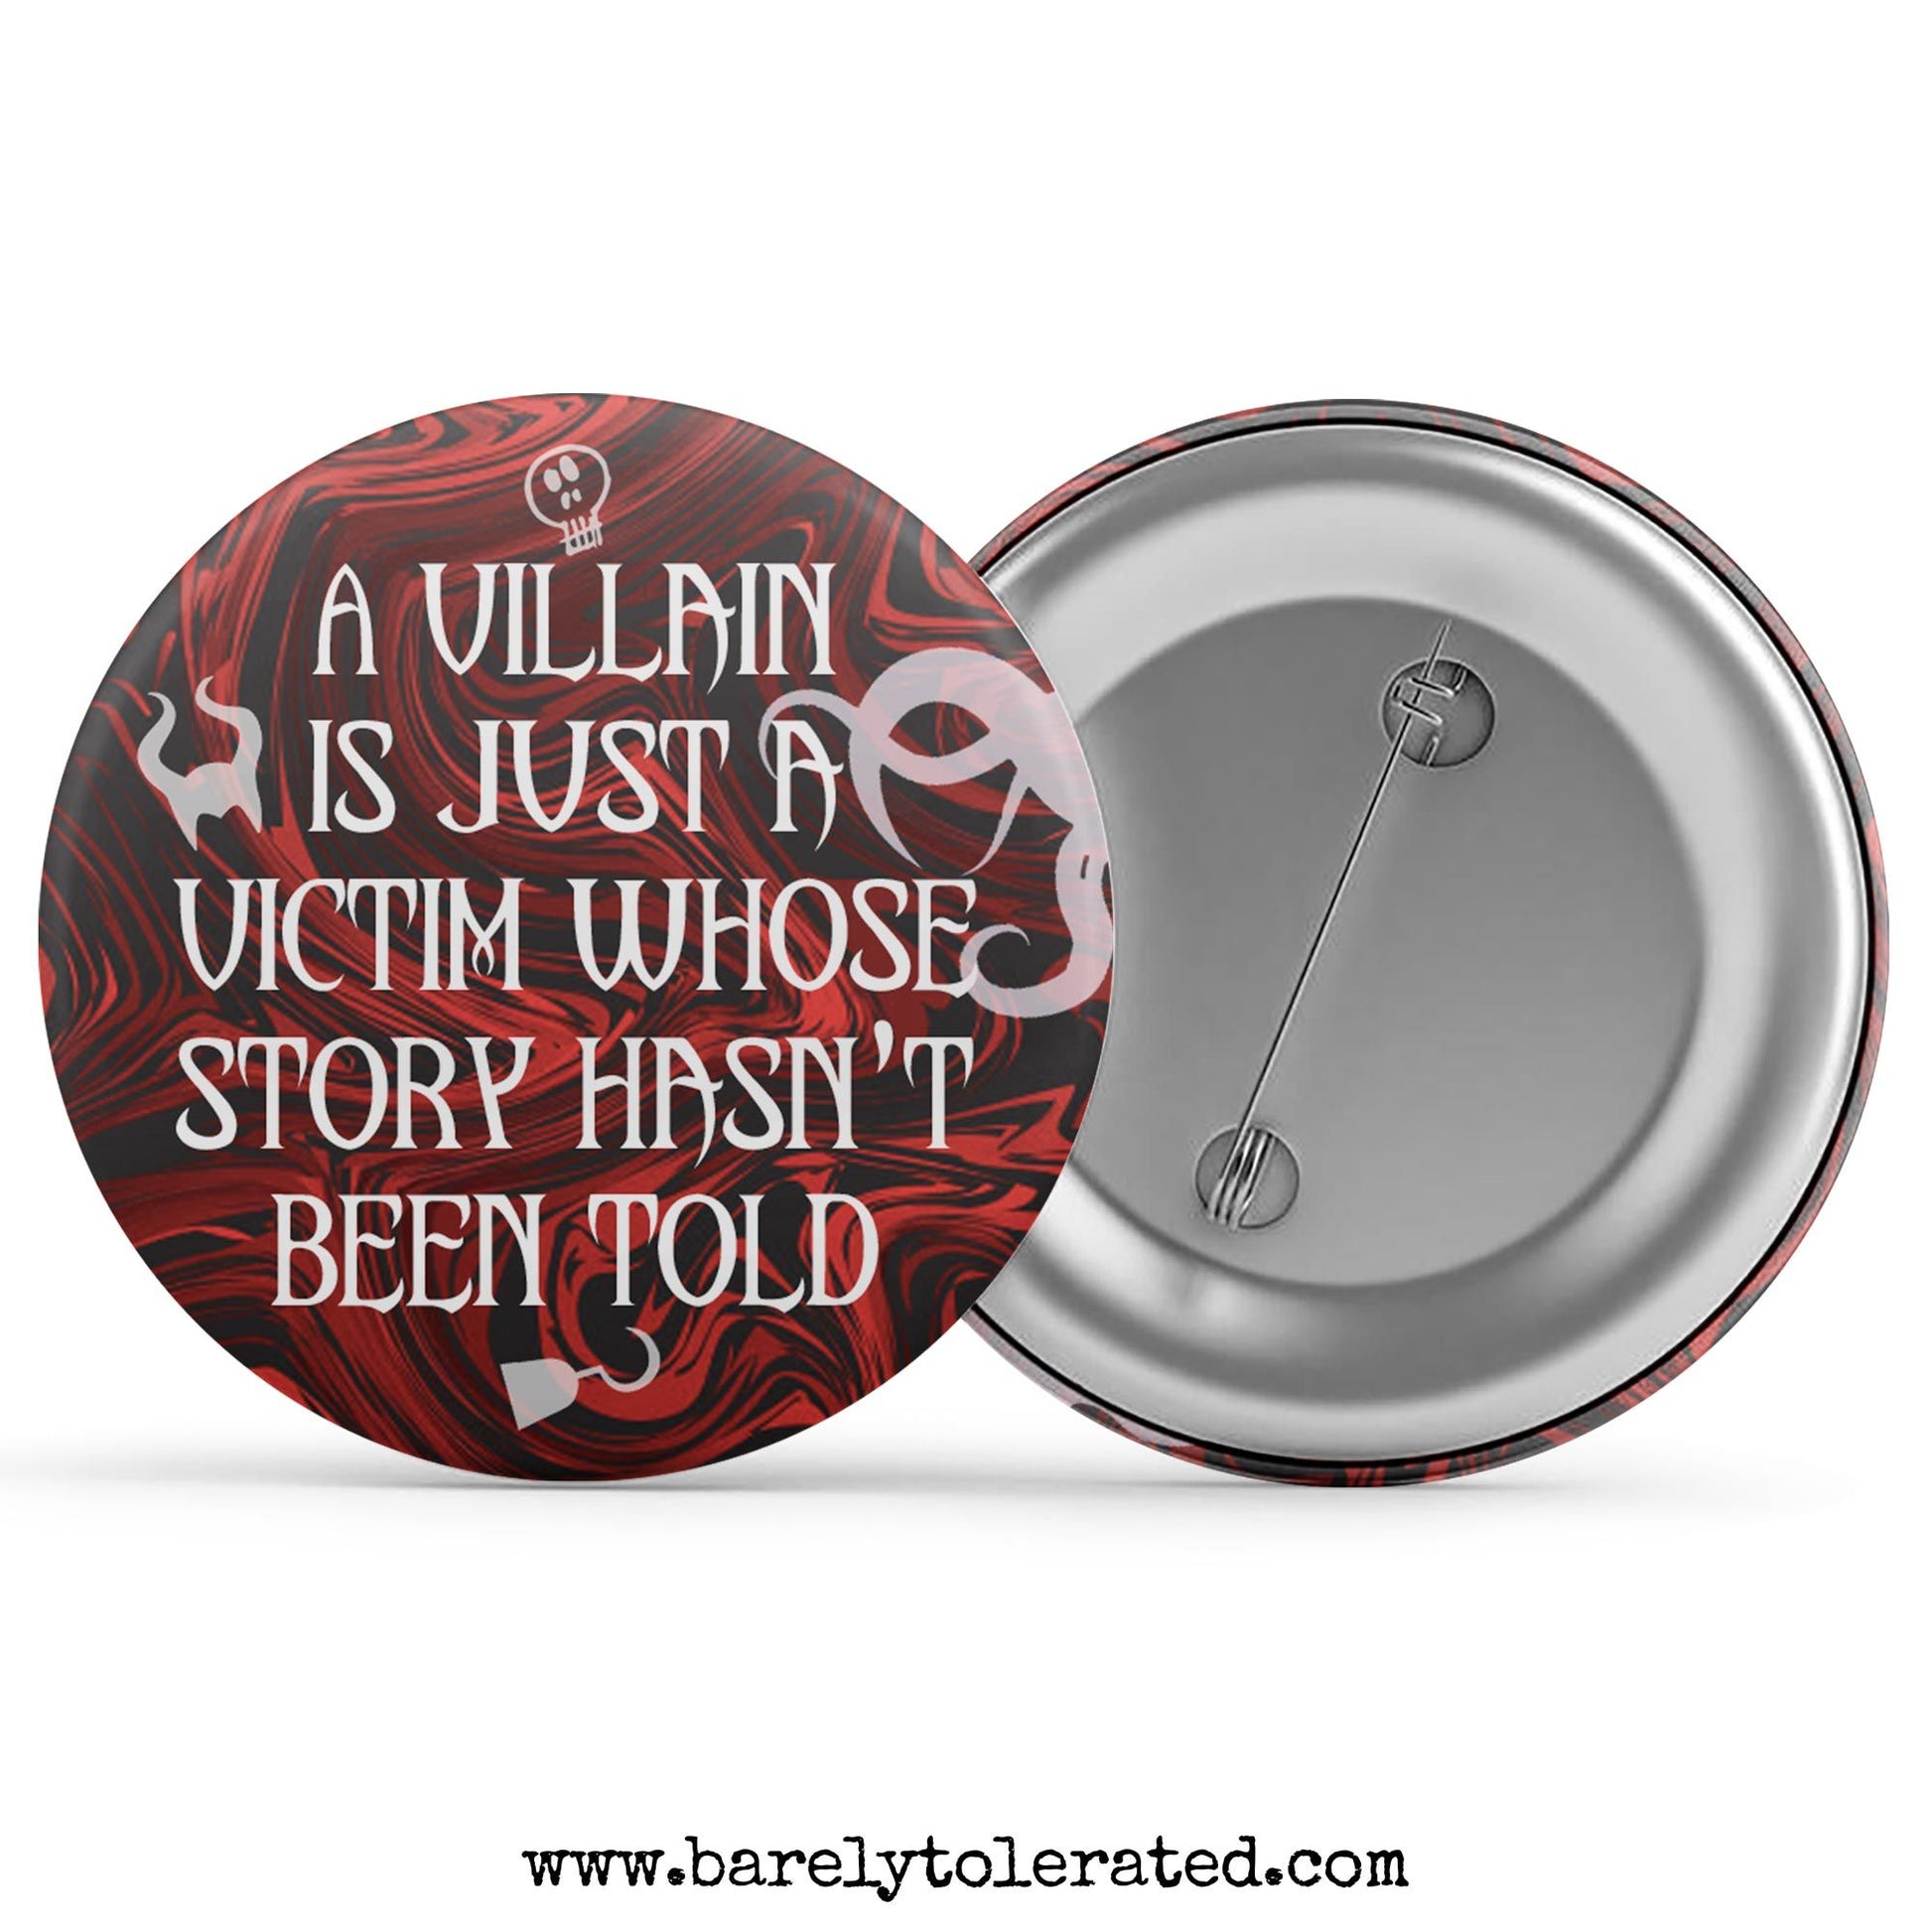 A Villain Is Just A Victim Whose Story Hasn't Been Told Image